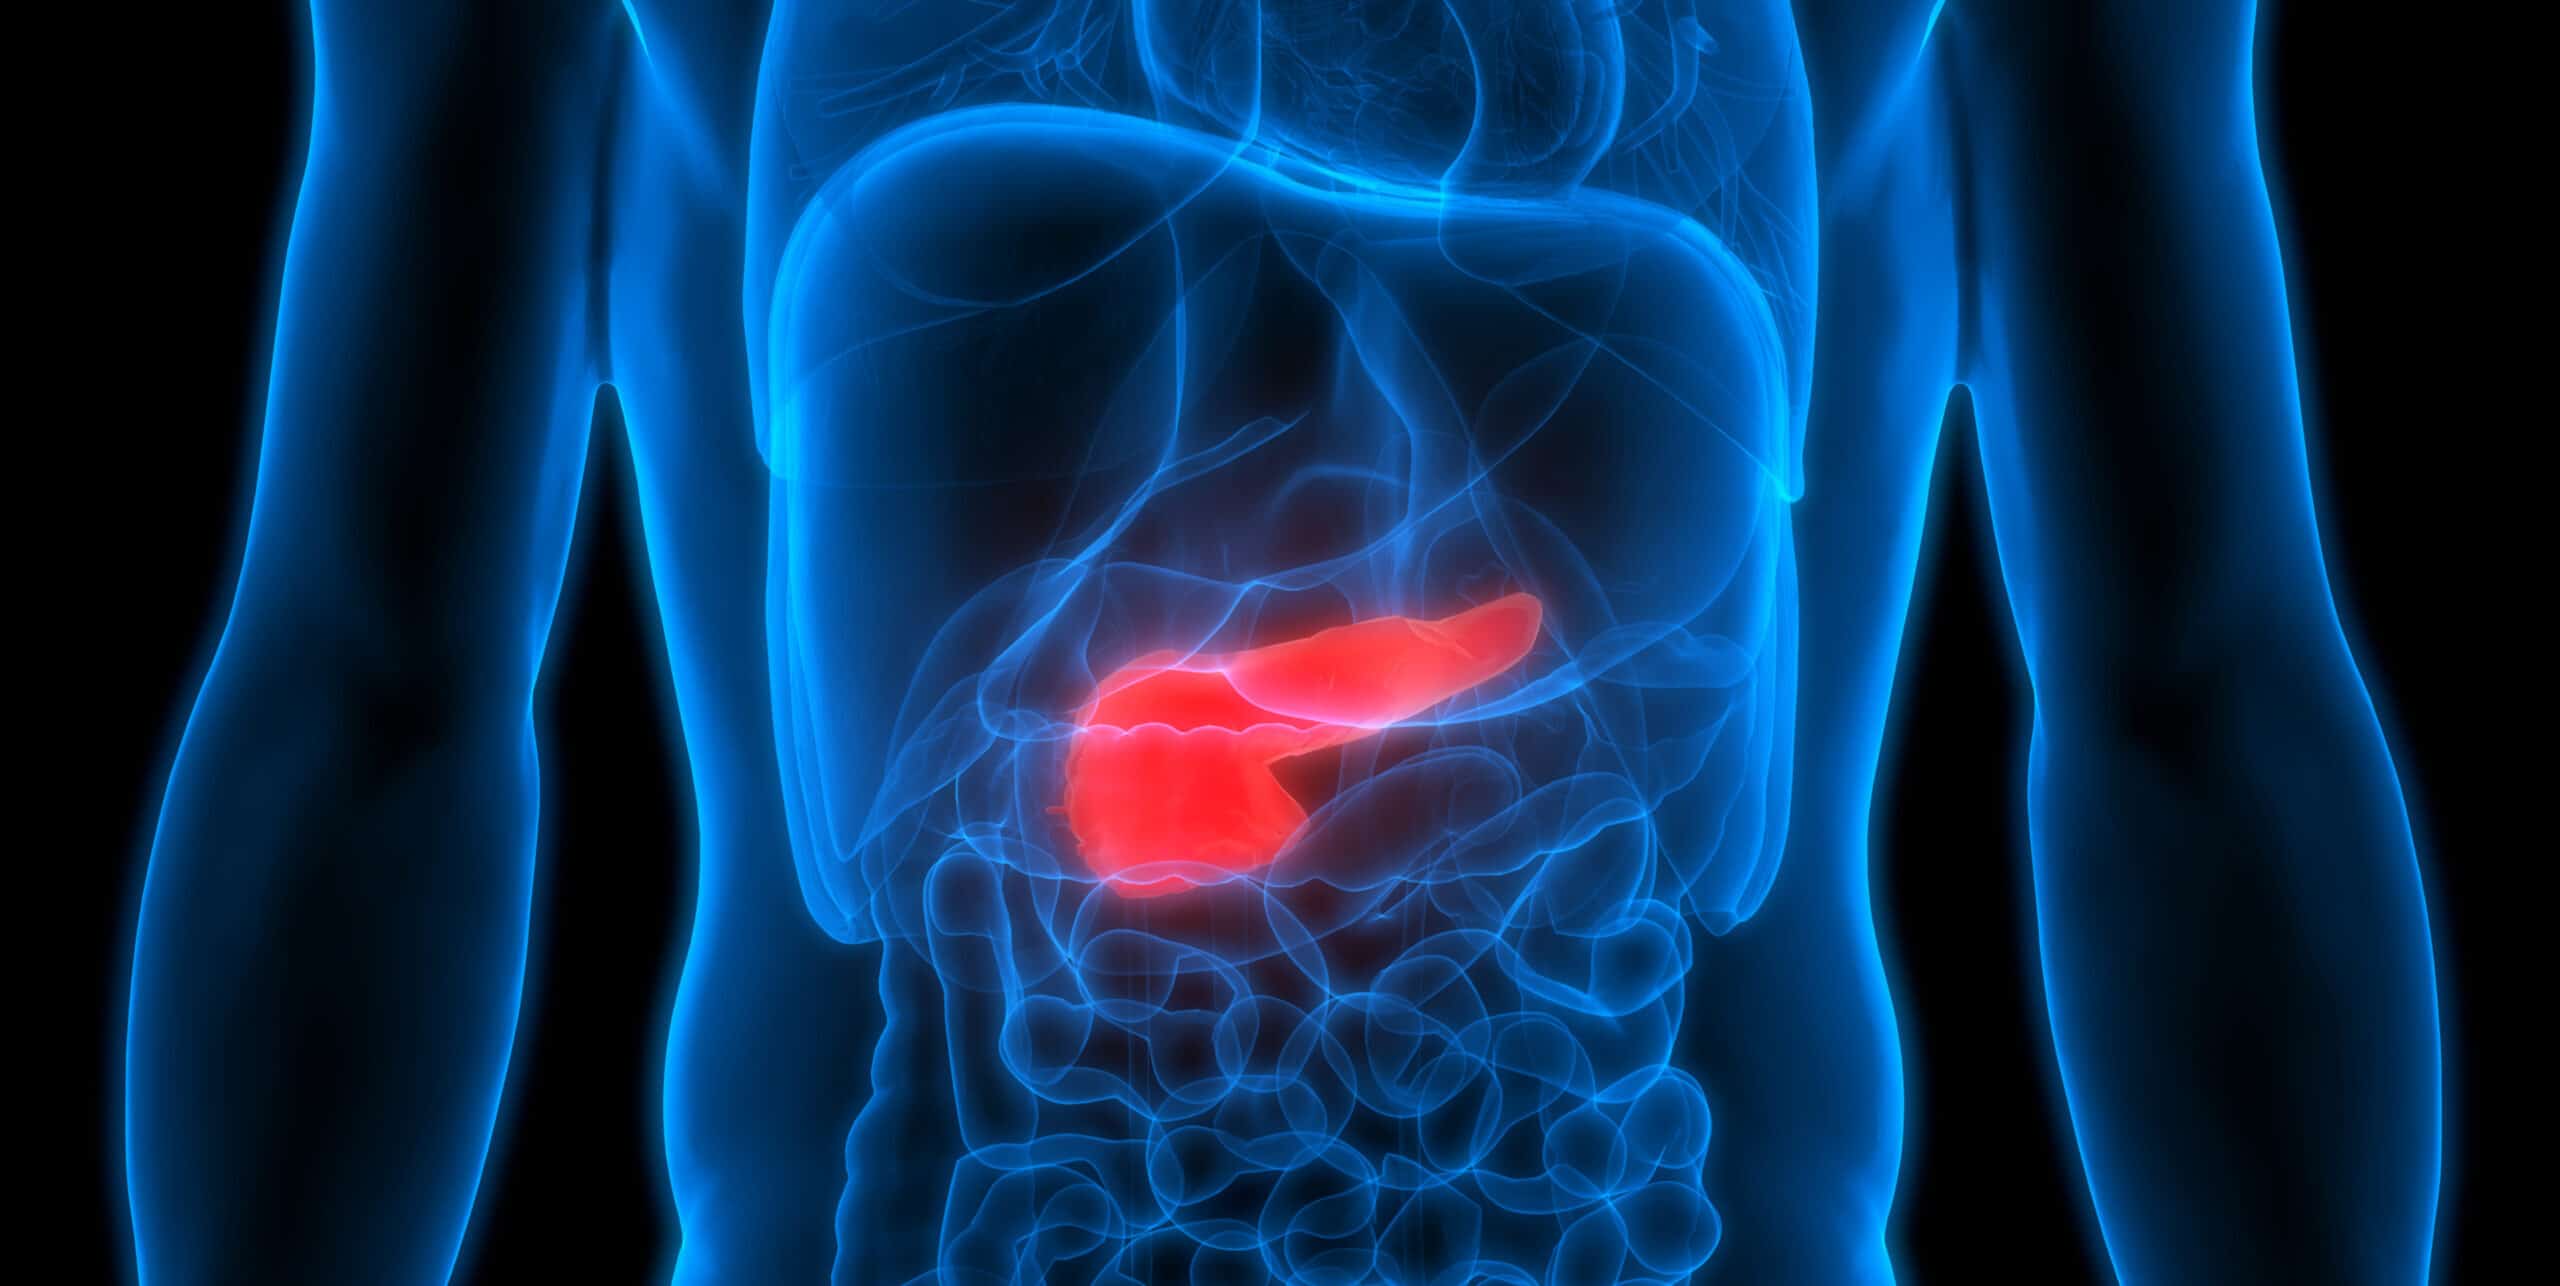 The Case for Pancreatic Cancer Radiomics